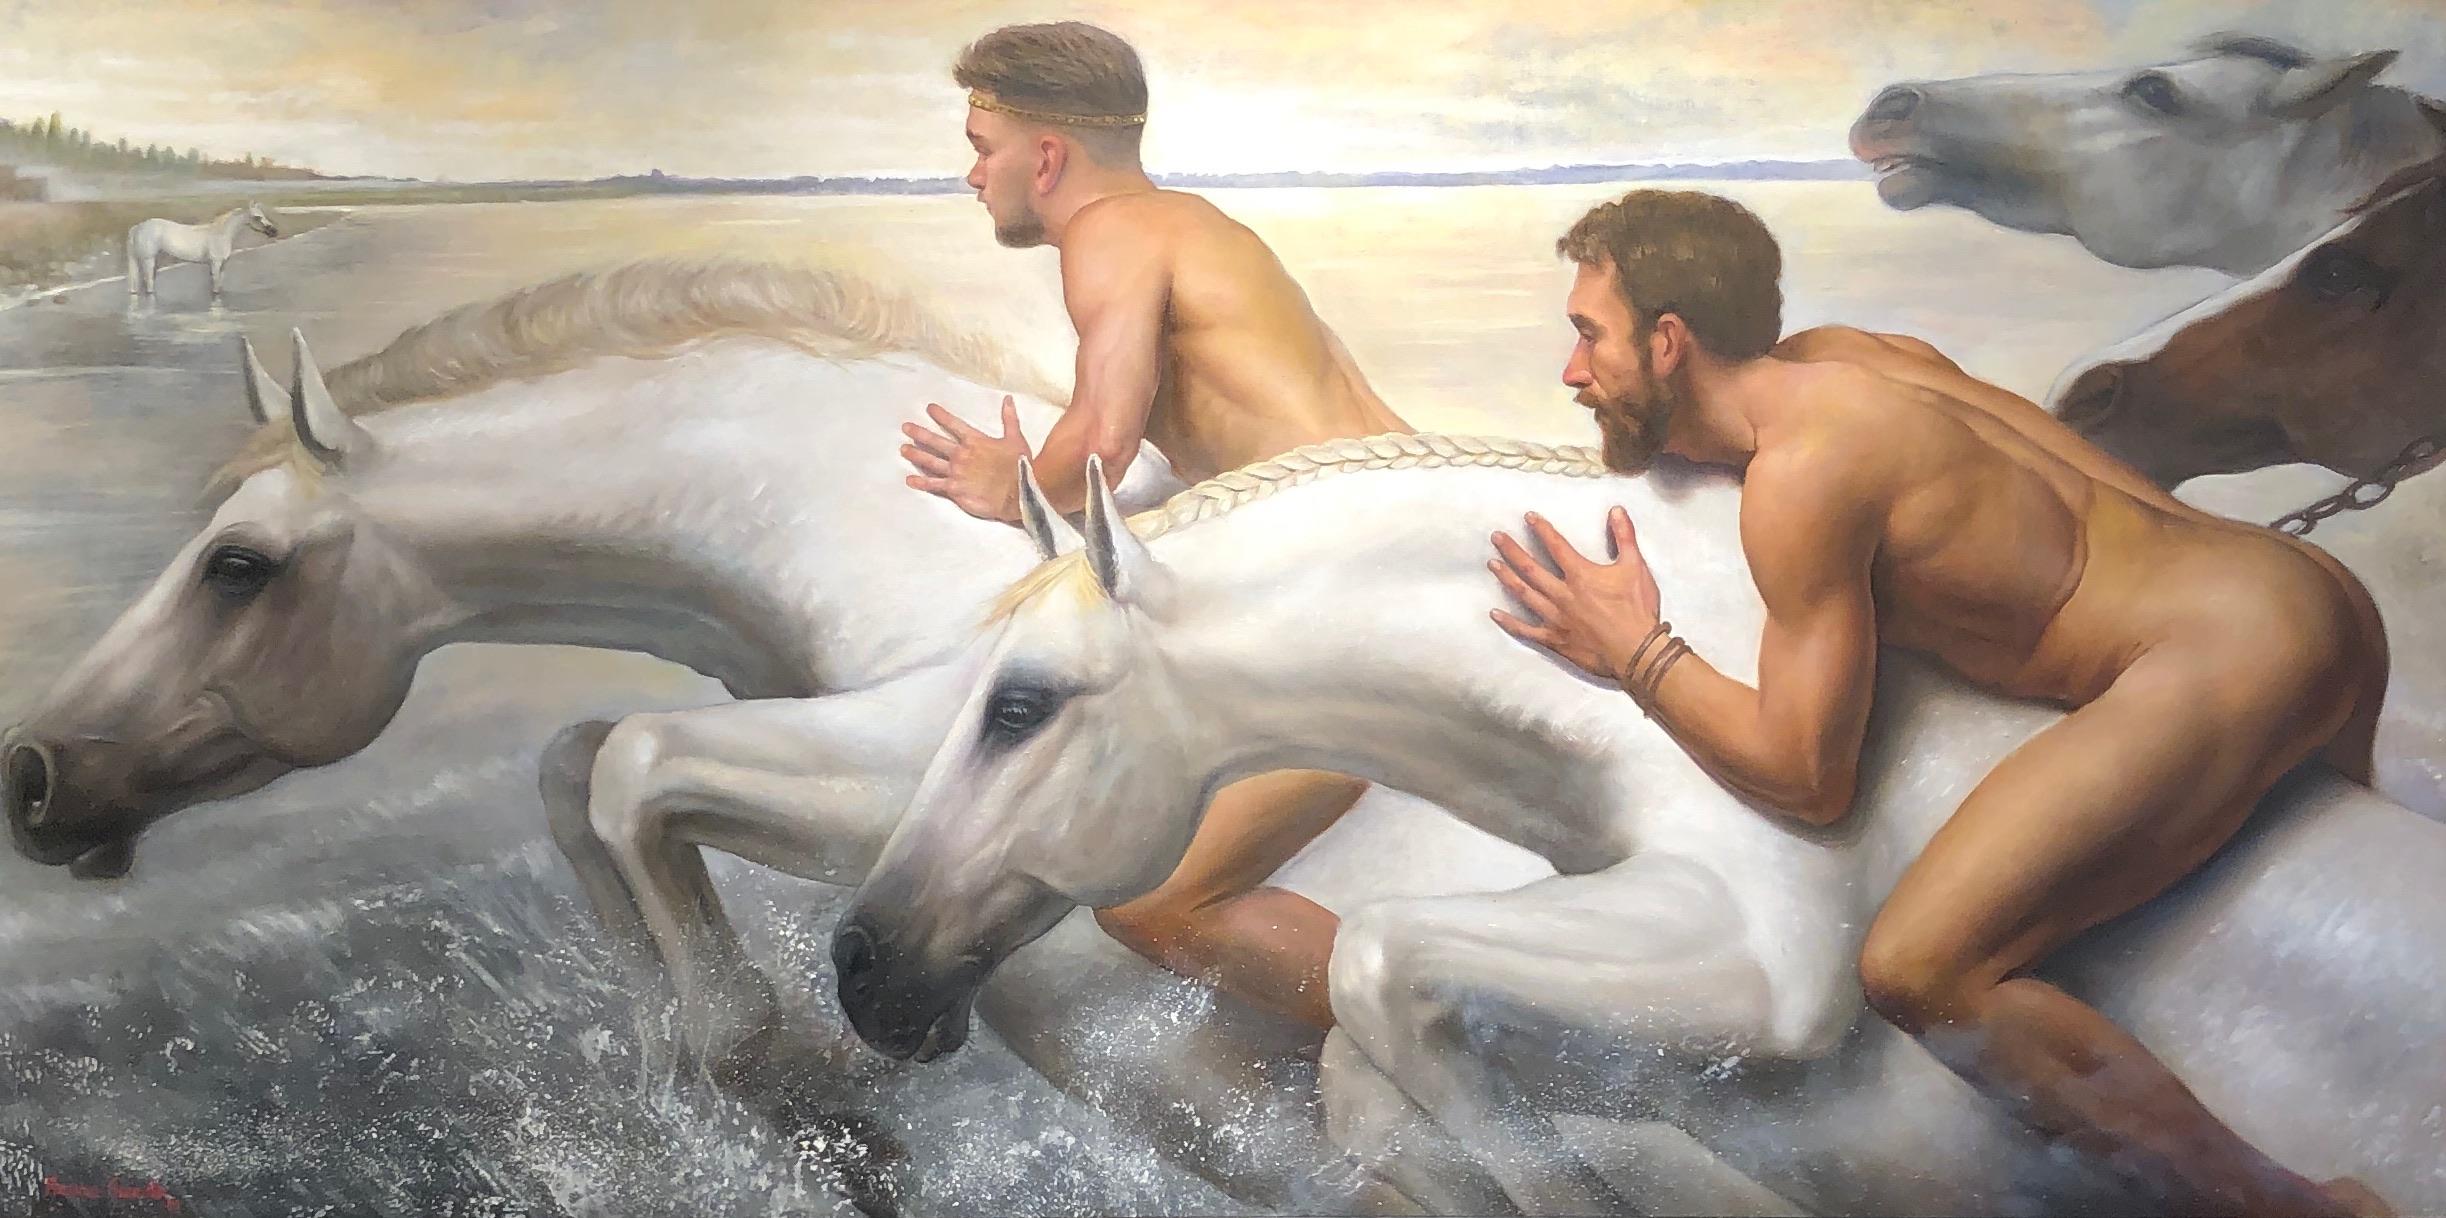 Bruno Surdo Figurative Painting - The Eighth Labor of Hercules, Nude Male Figures on Horseback, Oil on Canvas